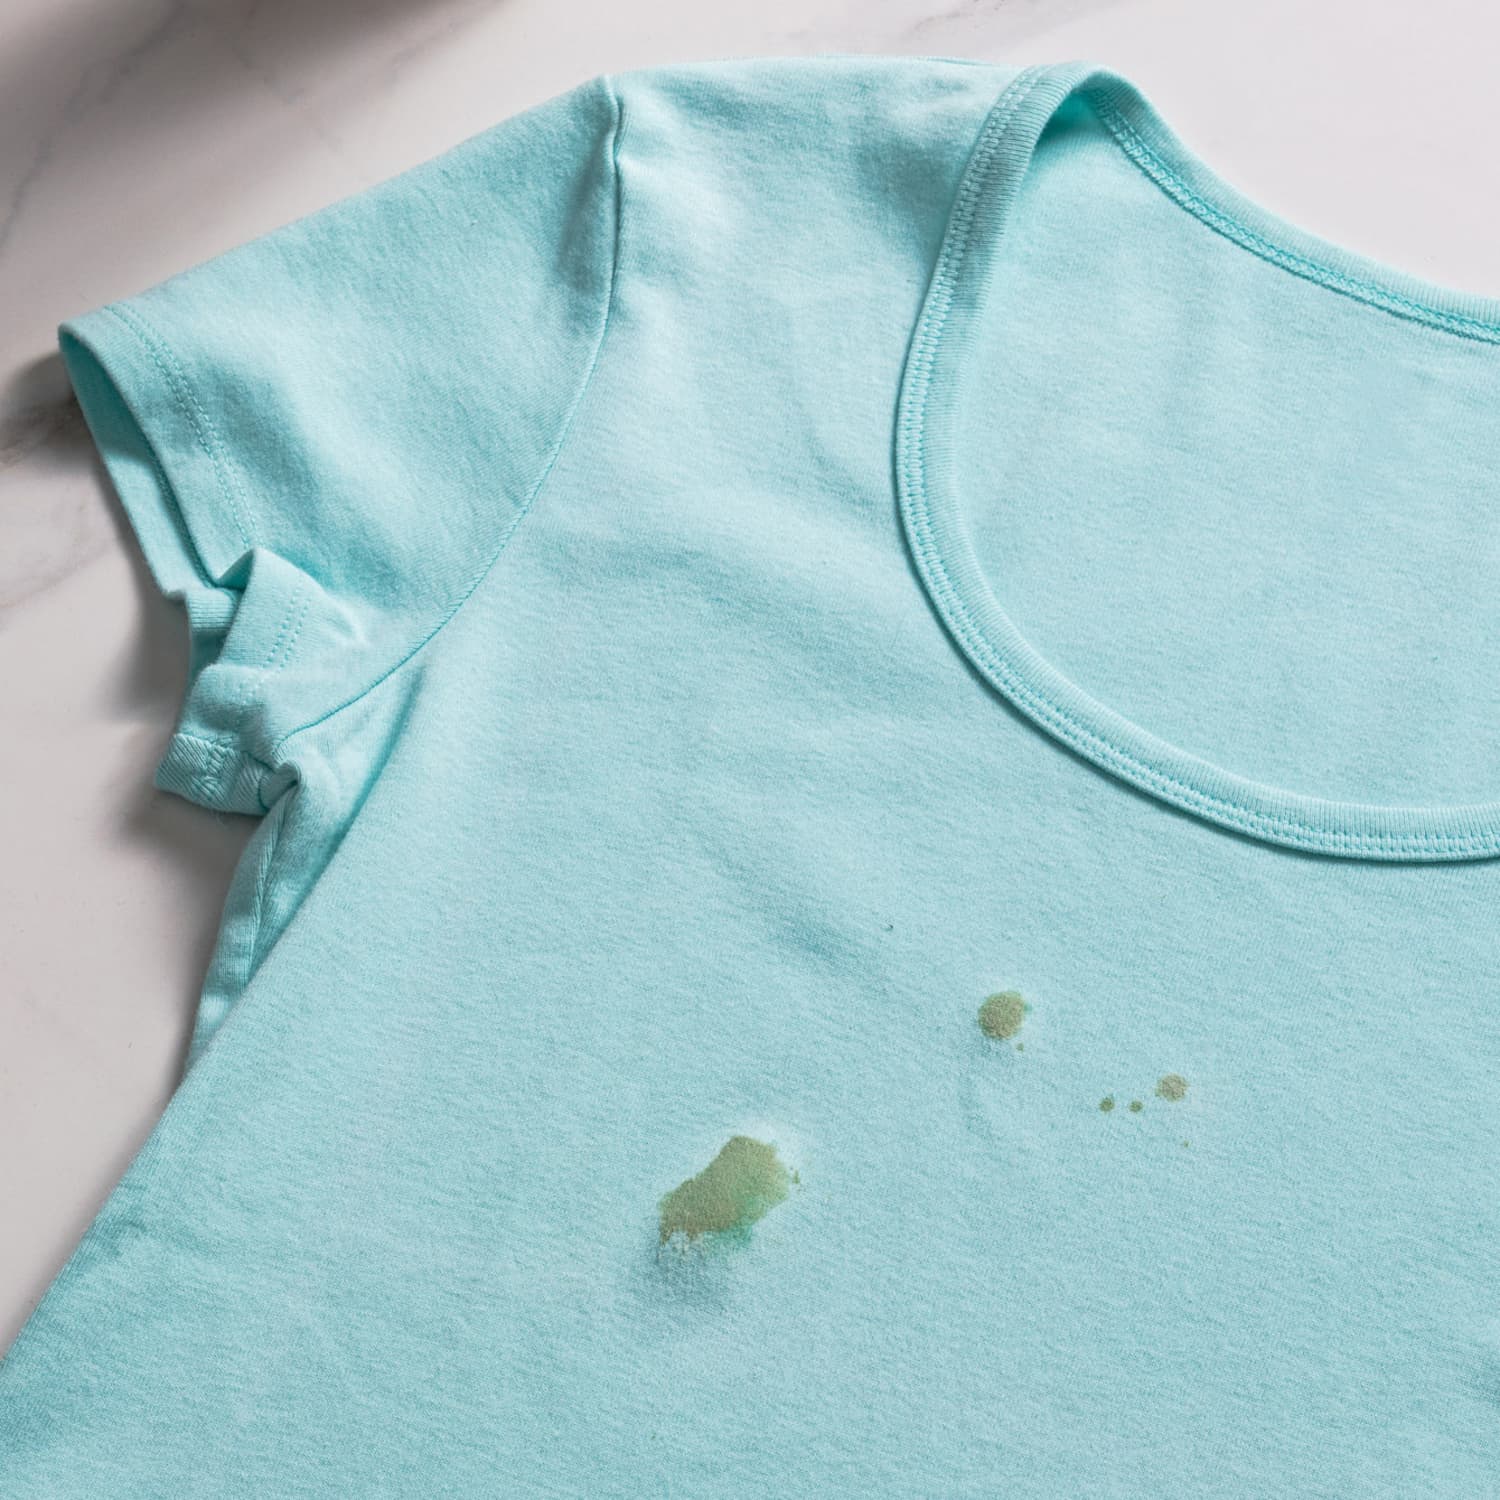 The 9 Biggest Clothing Stain Removal Mistakes